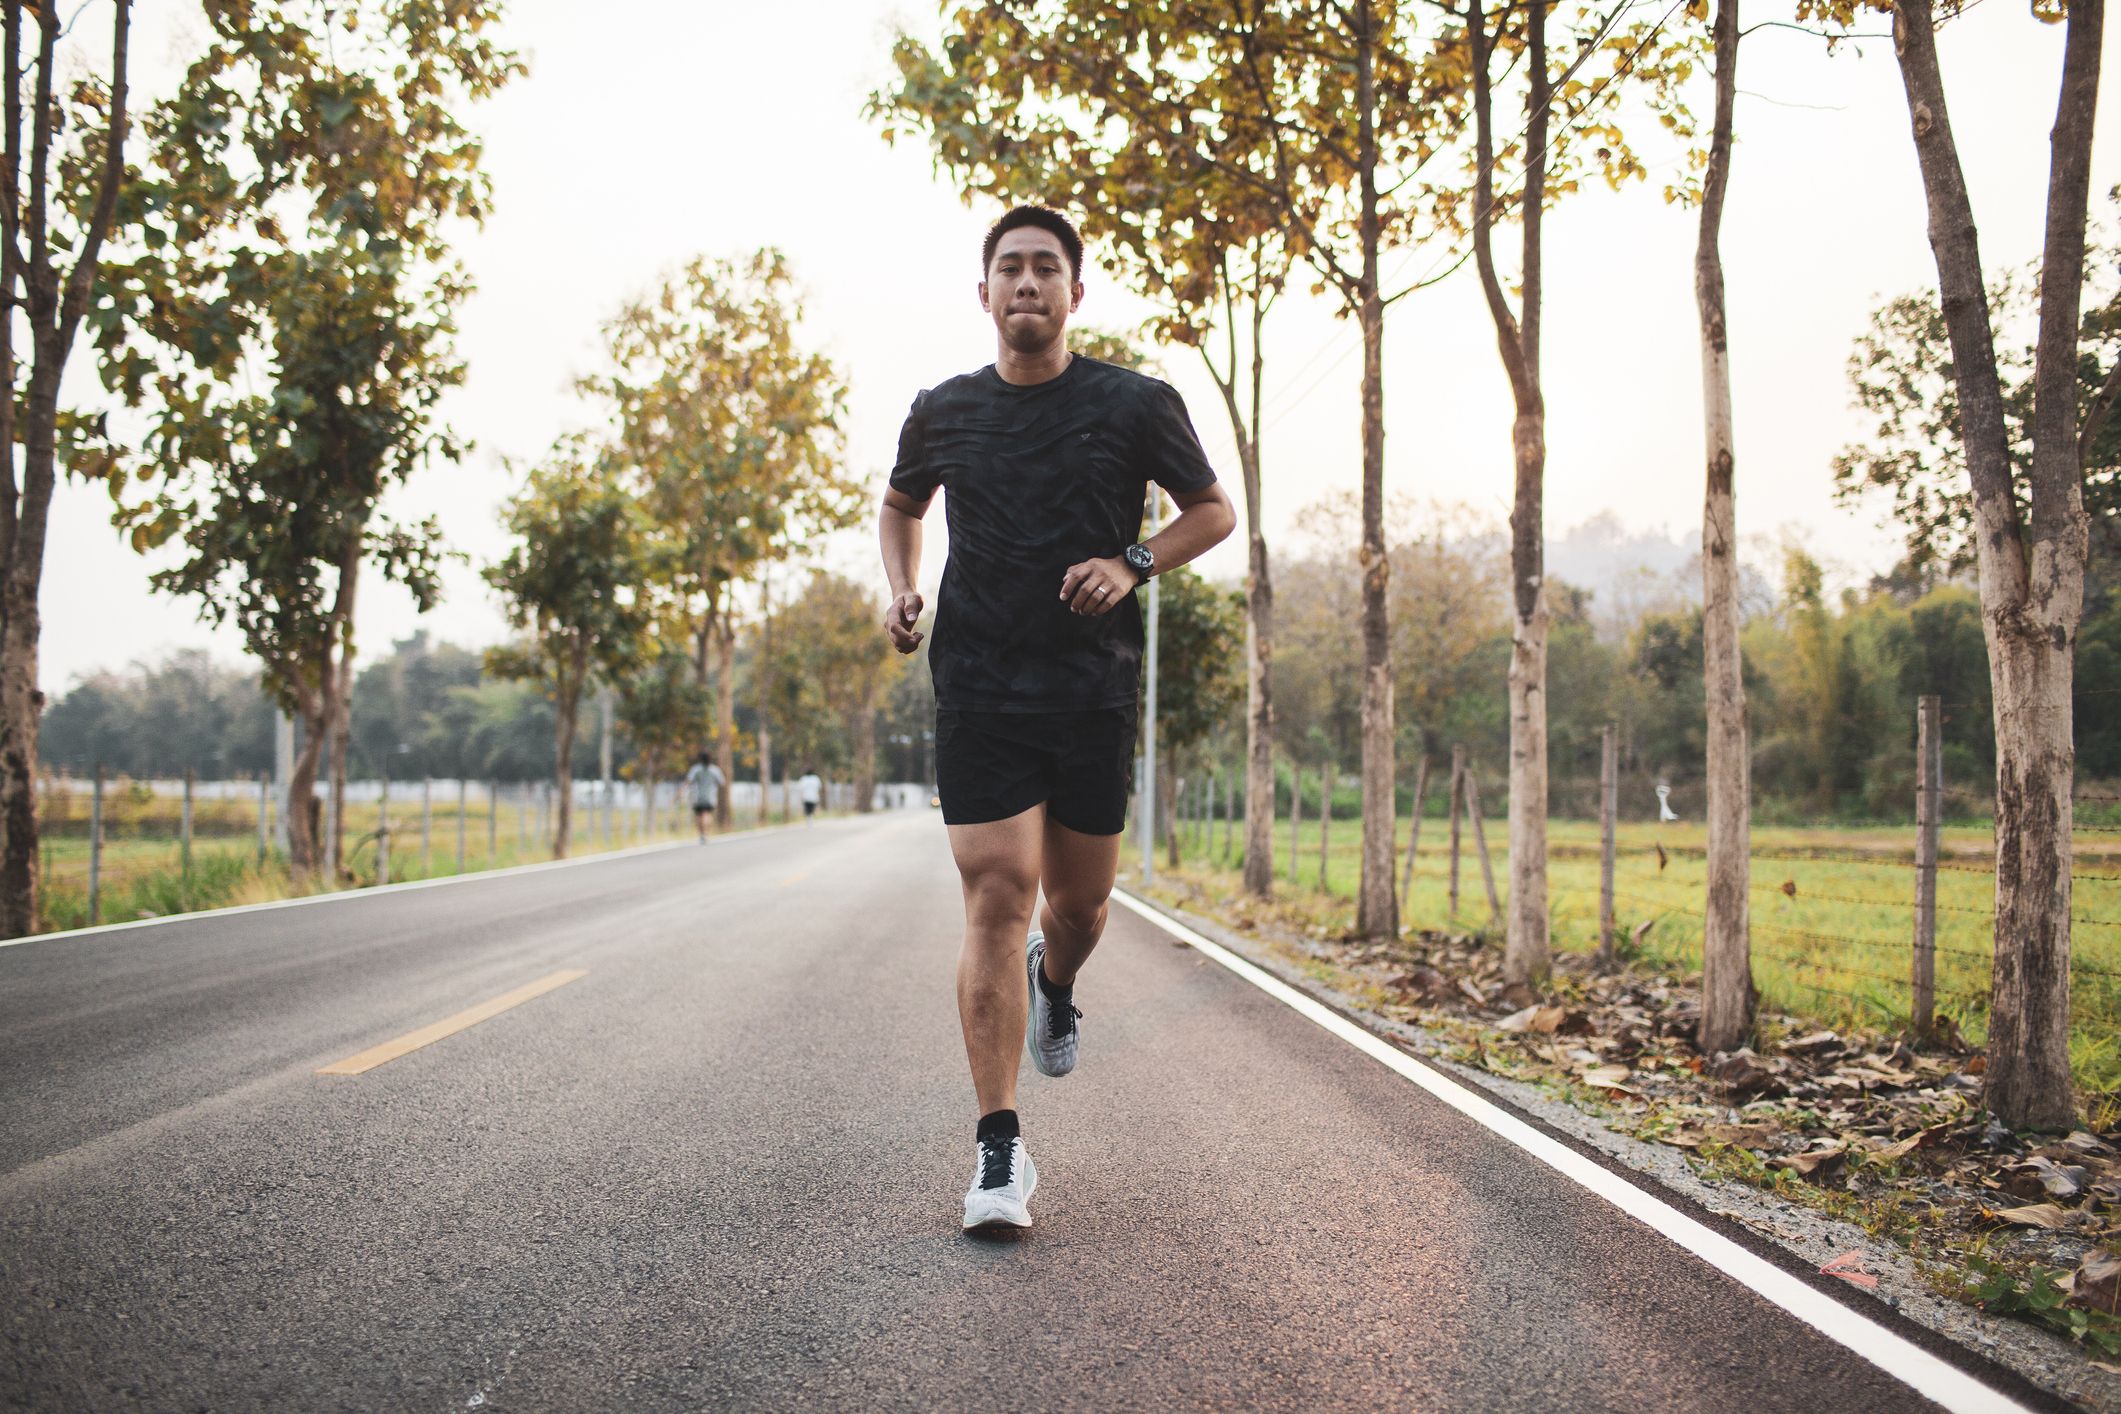 Training Tips For Runners: How To Train Smart With Proper Running